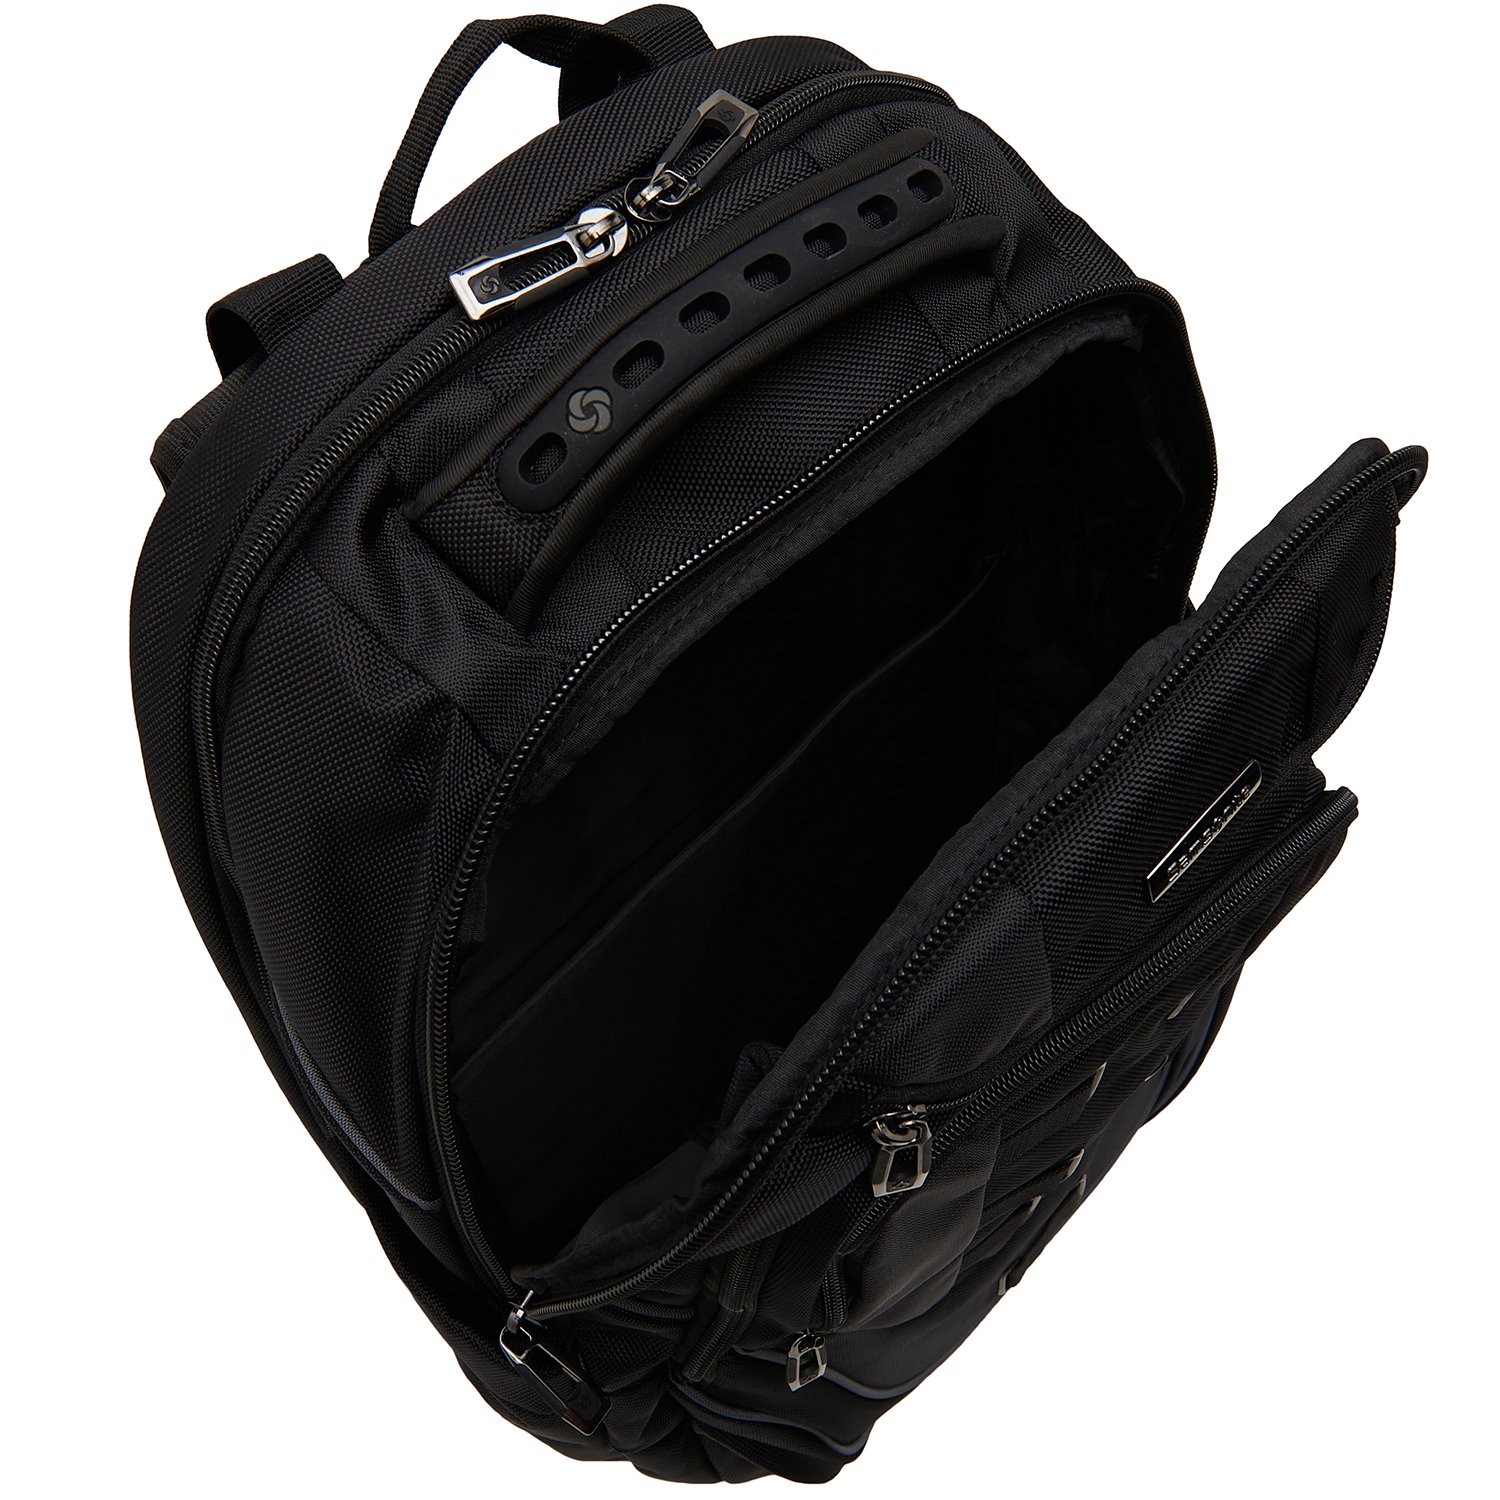 LEVIATHAN-LAPT.BACKPACK 17.3"-S2921 S59N-901-SF000*39